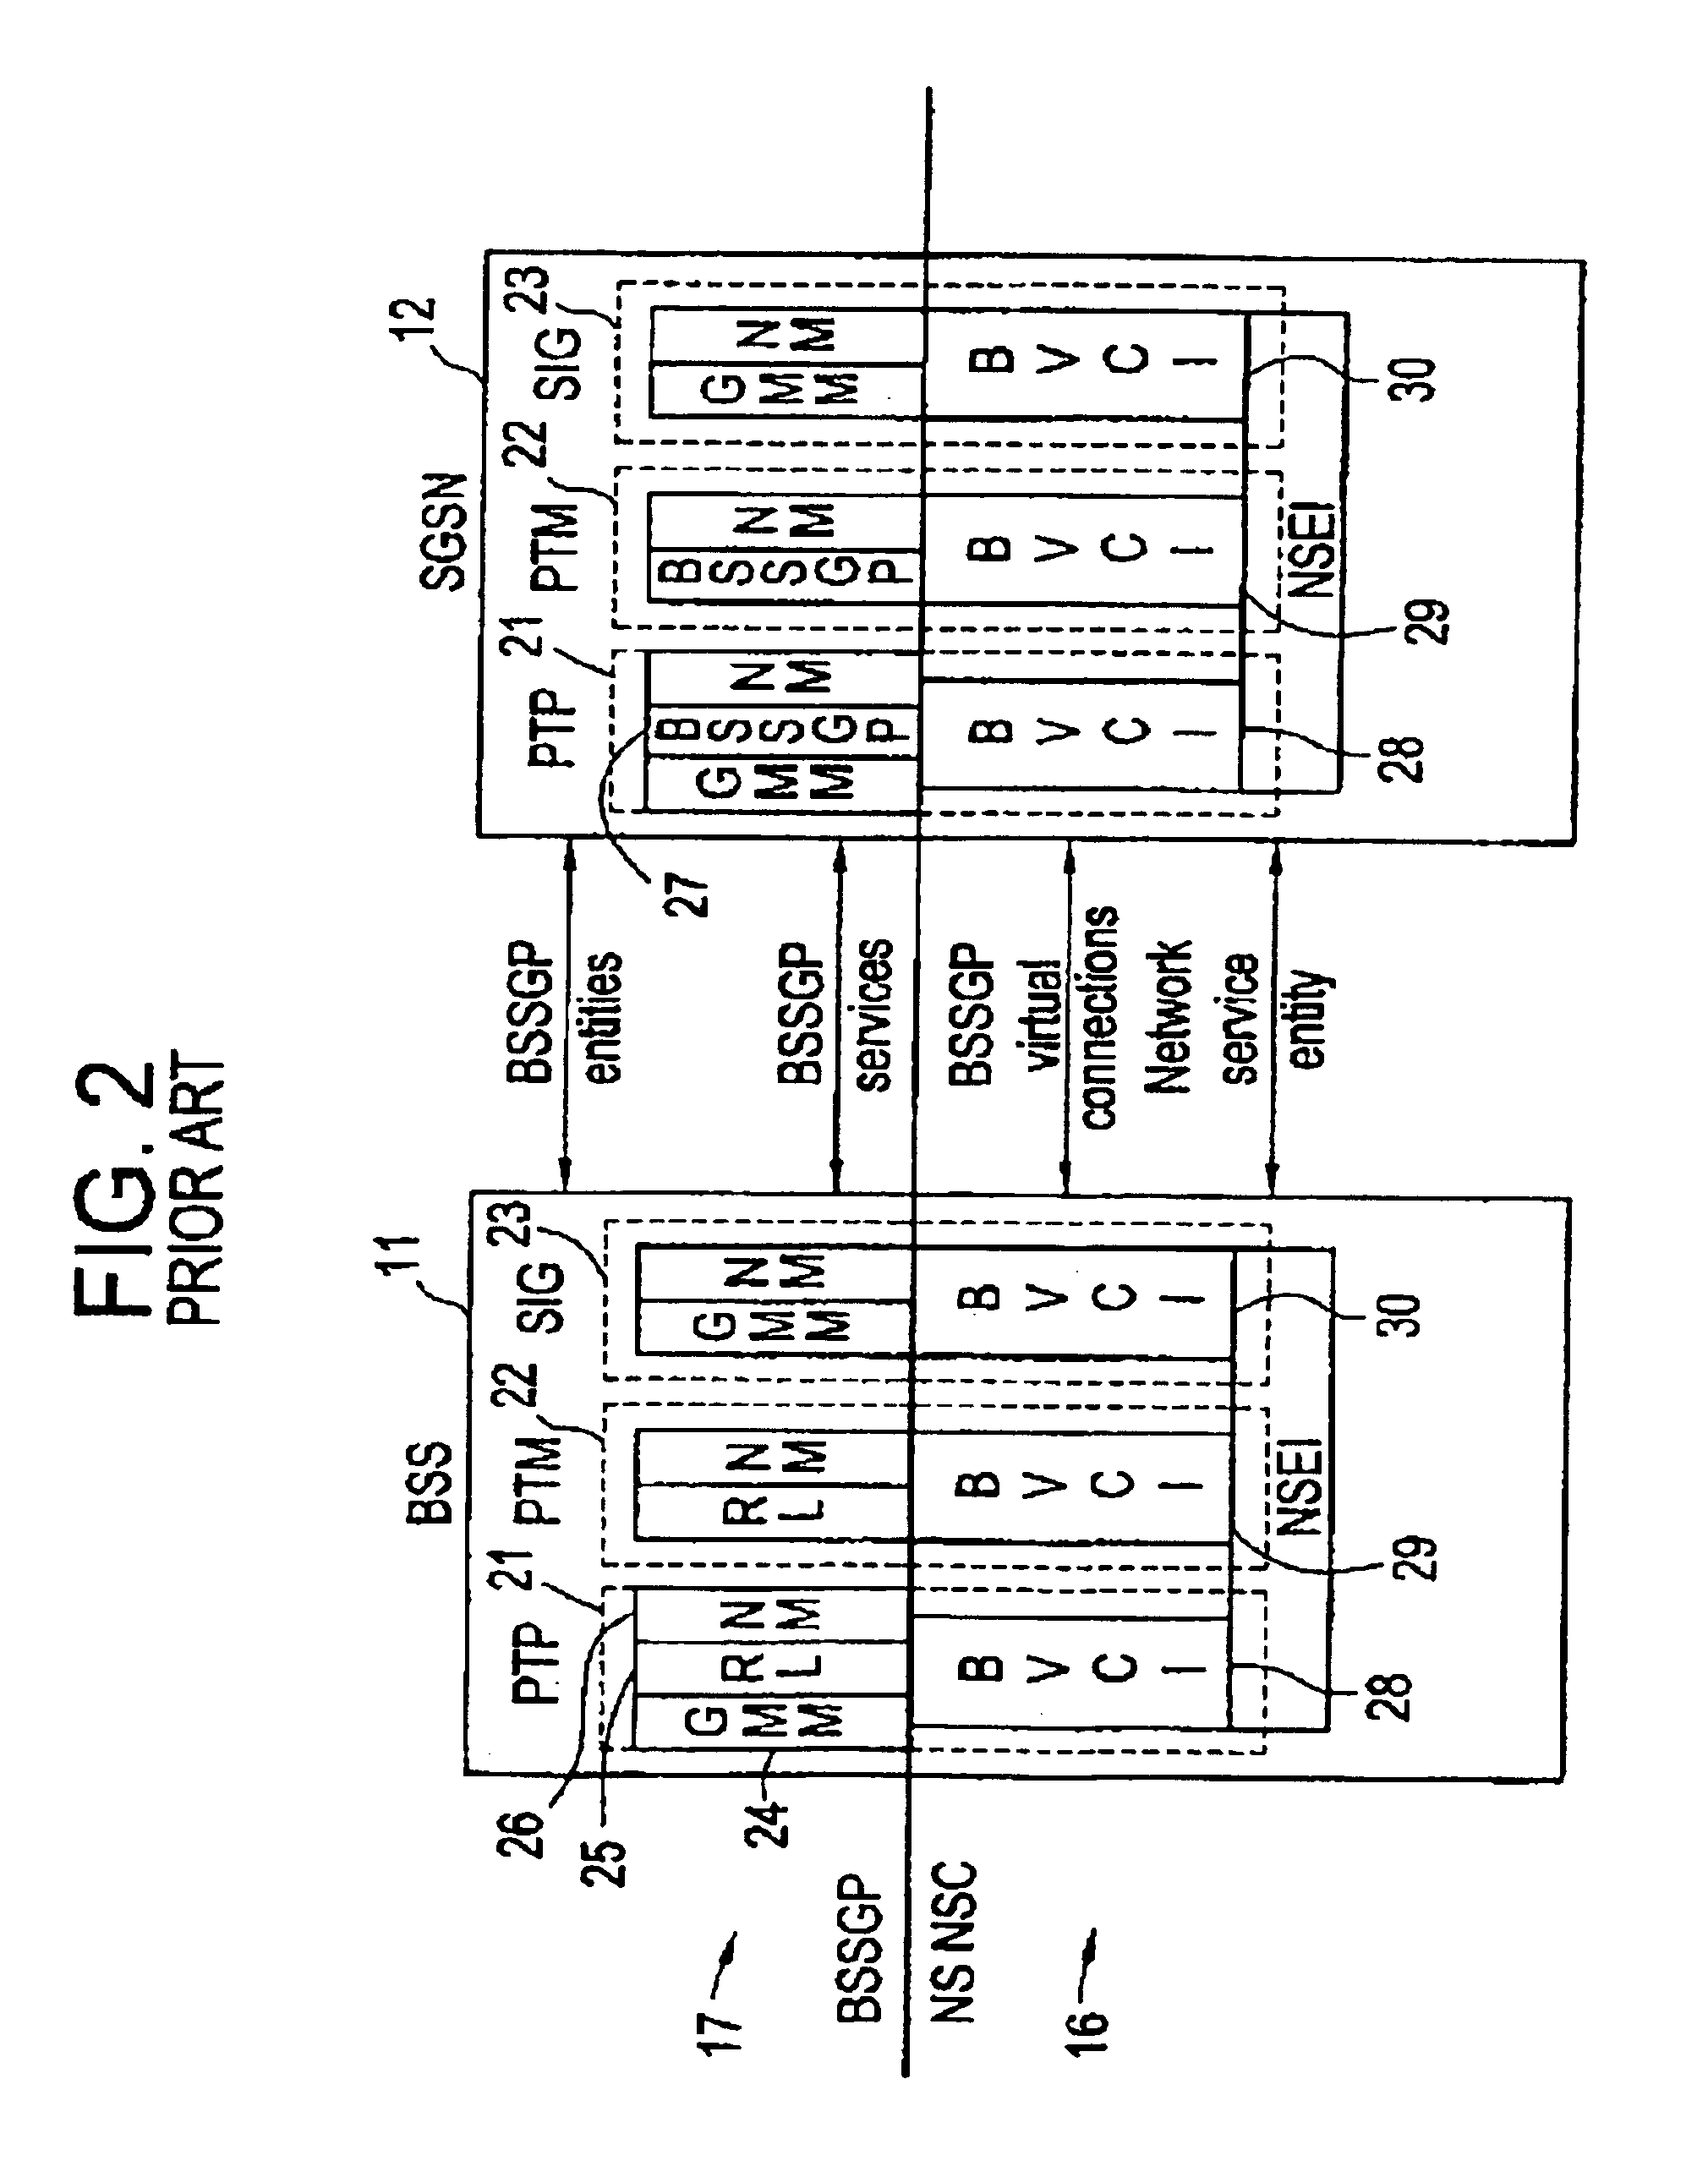 System and method for automatically configuring network service entity identifiers utilizing a Gb-over-IP interface in a GPRS network